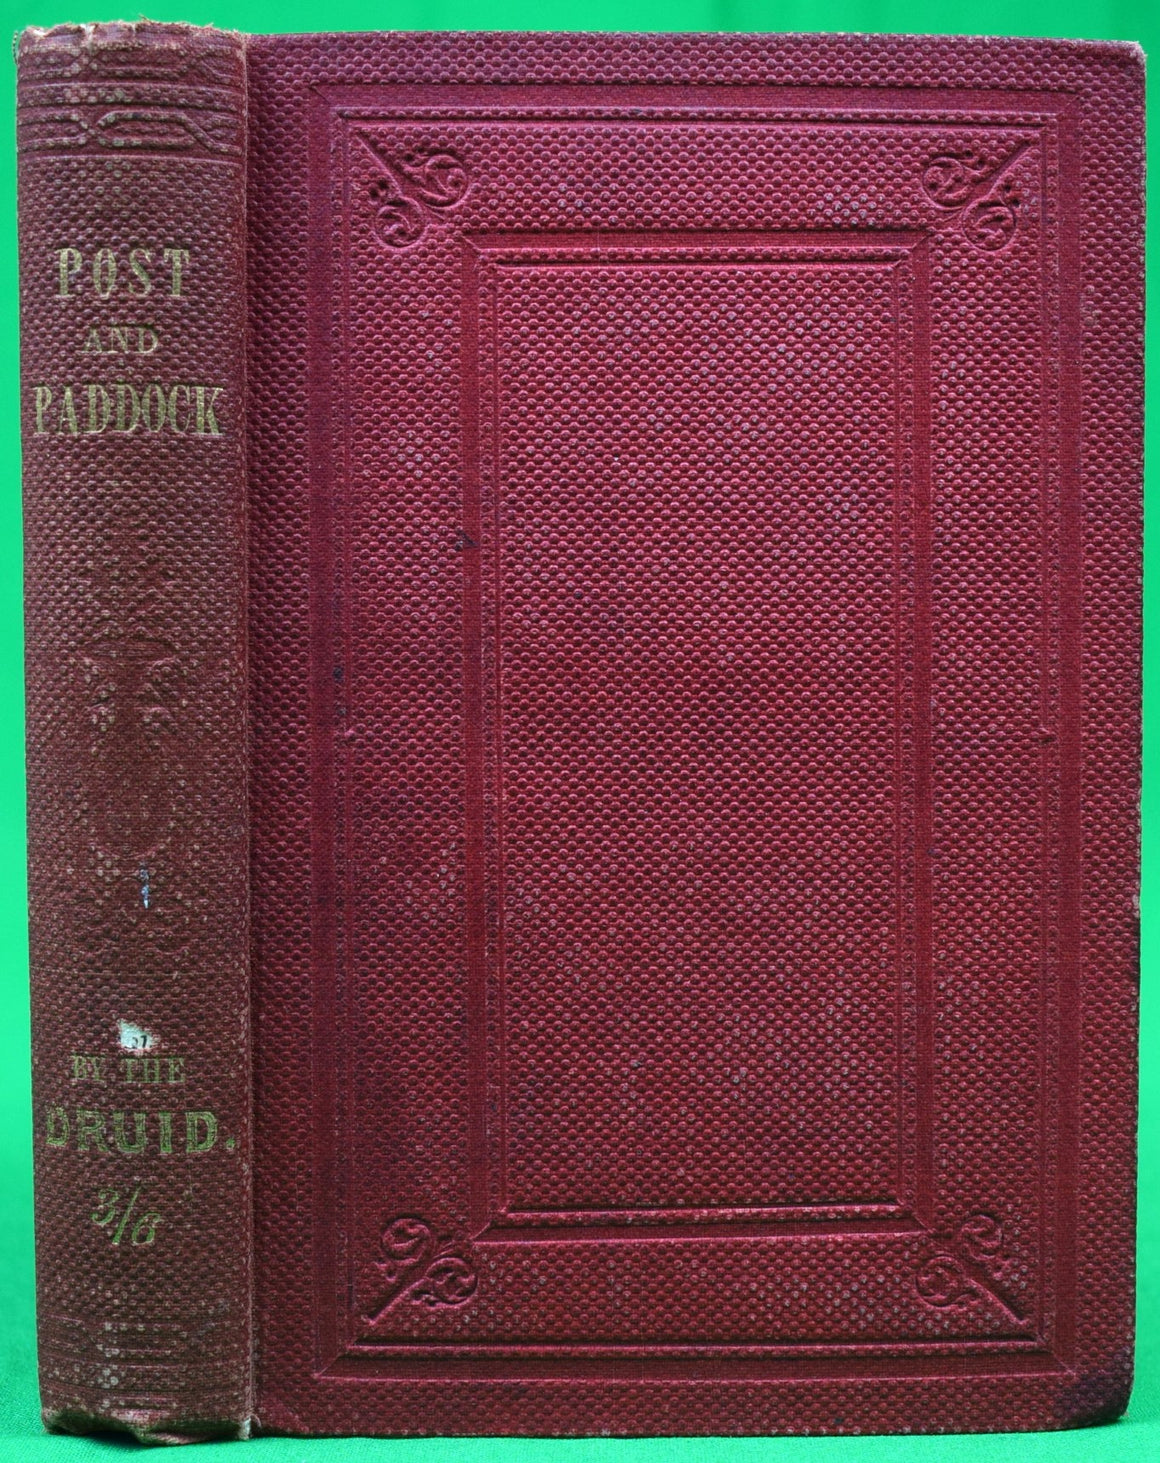 "The Post And The Paddock" 1856 The Druid